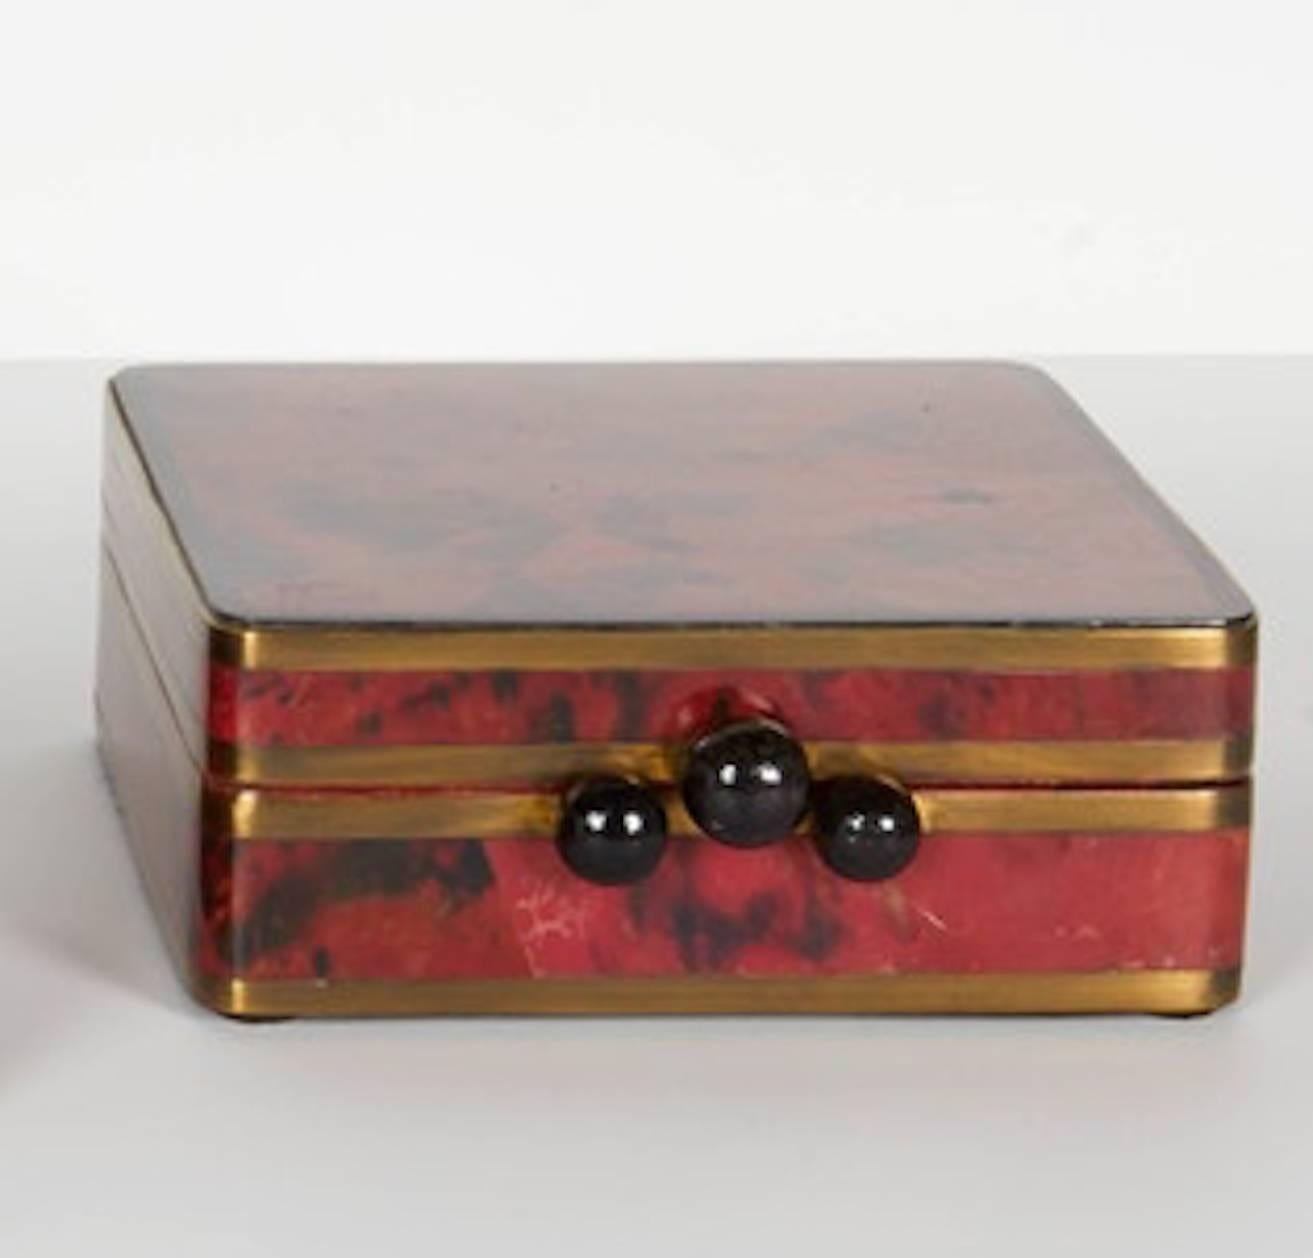 Hand-Crafted Elegant Pen Shell Decorative Box with Bronze and Onyx Details